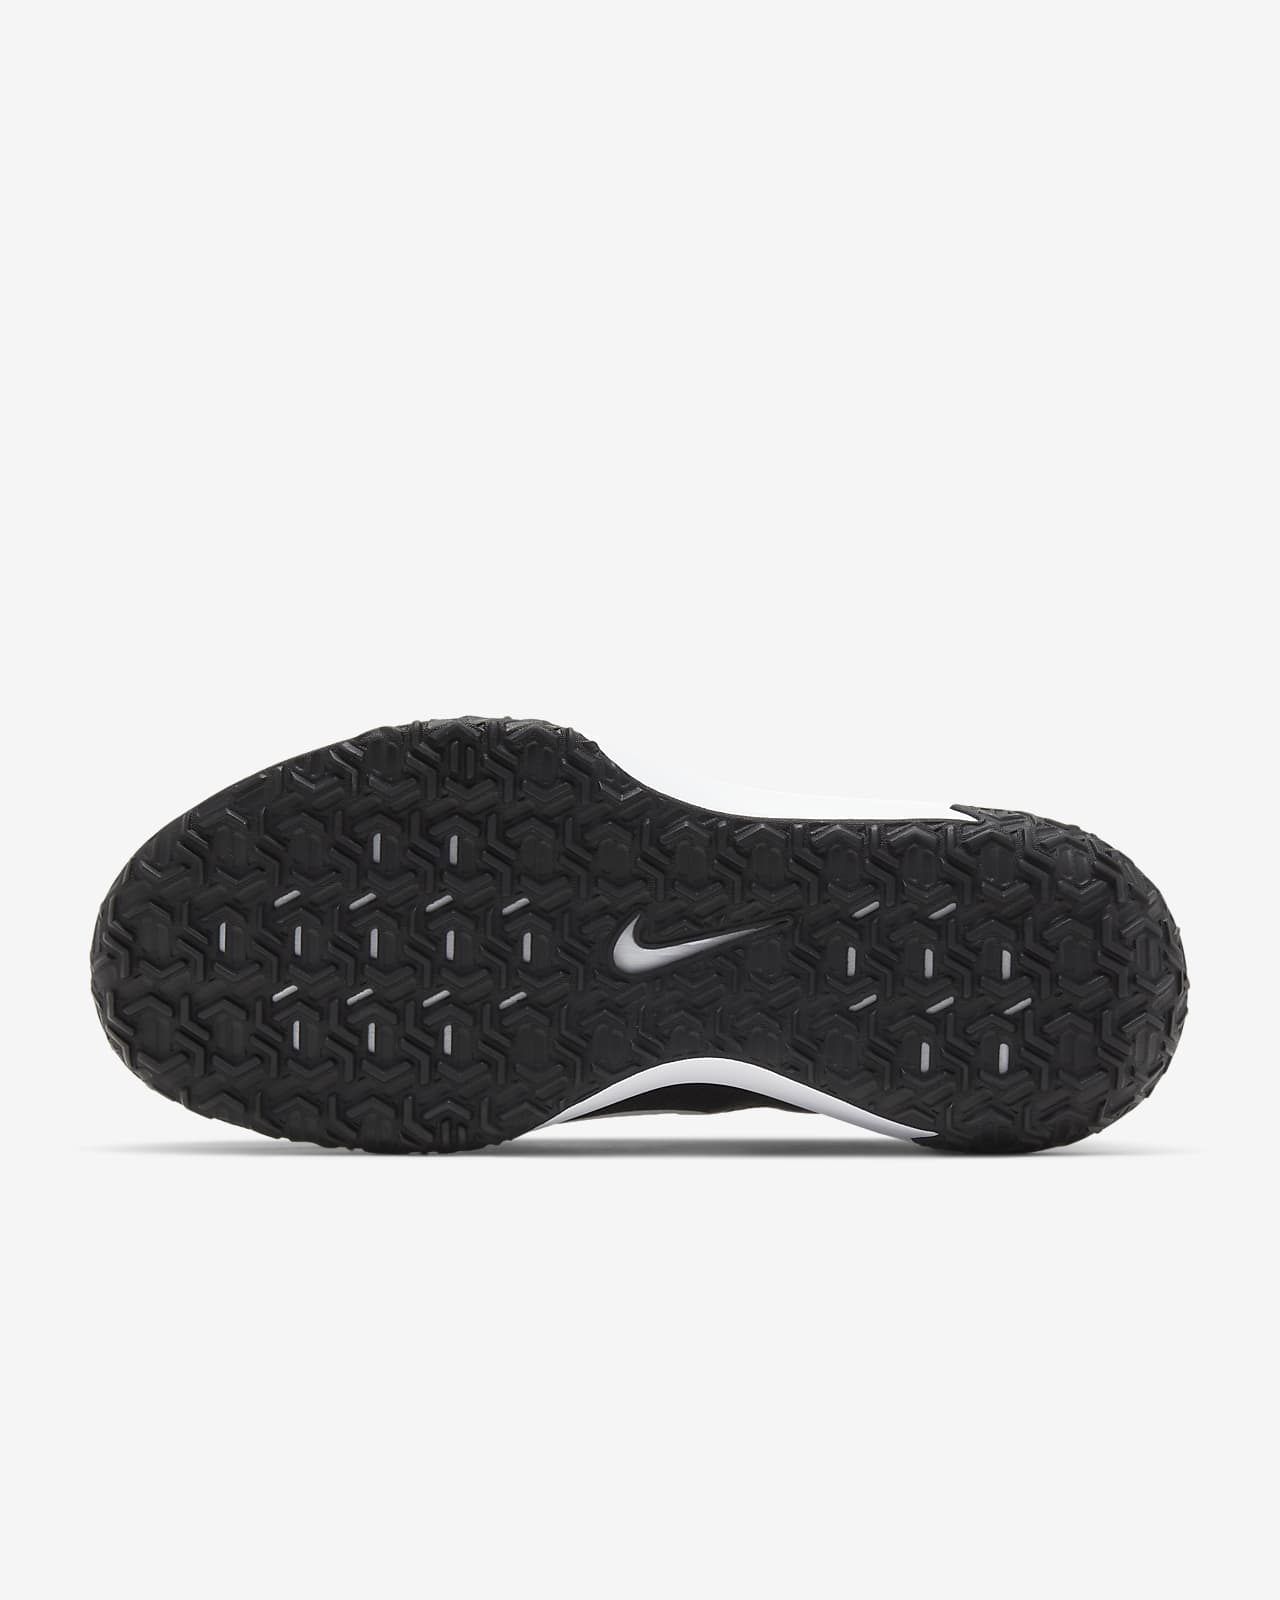 nike varsity compete tr 2 extra wide